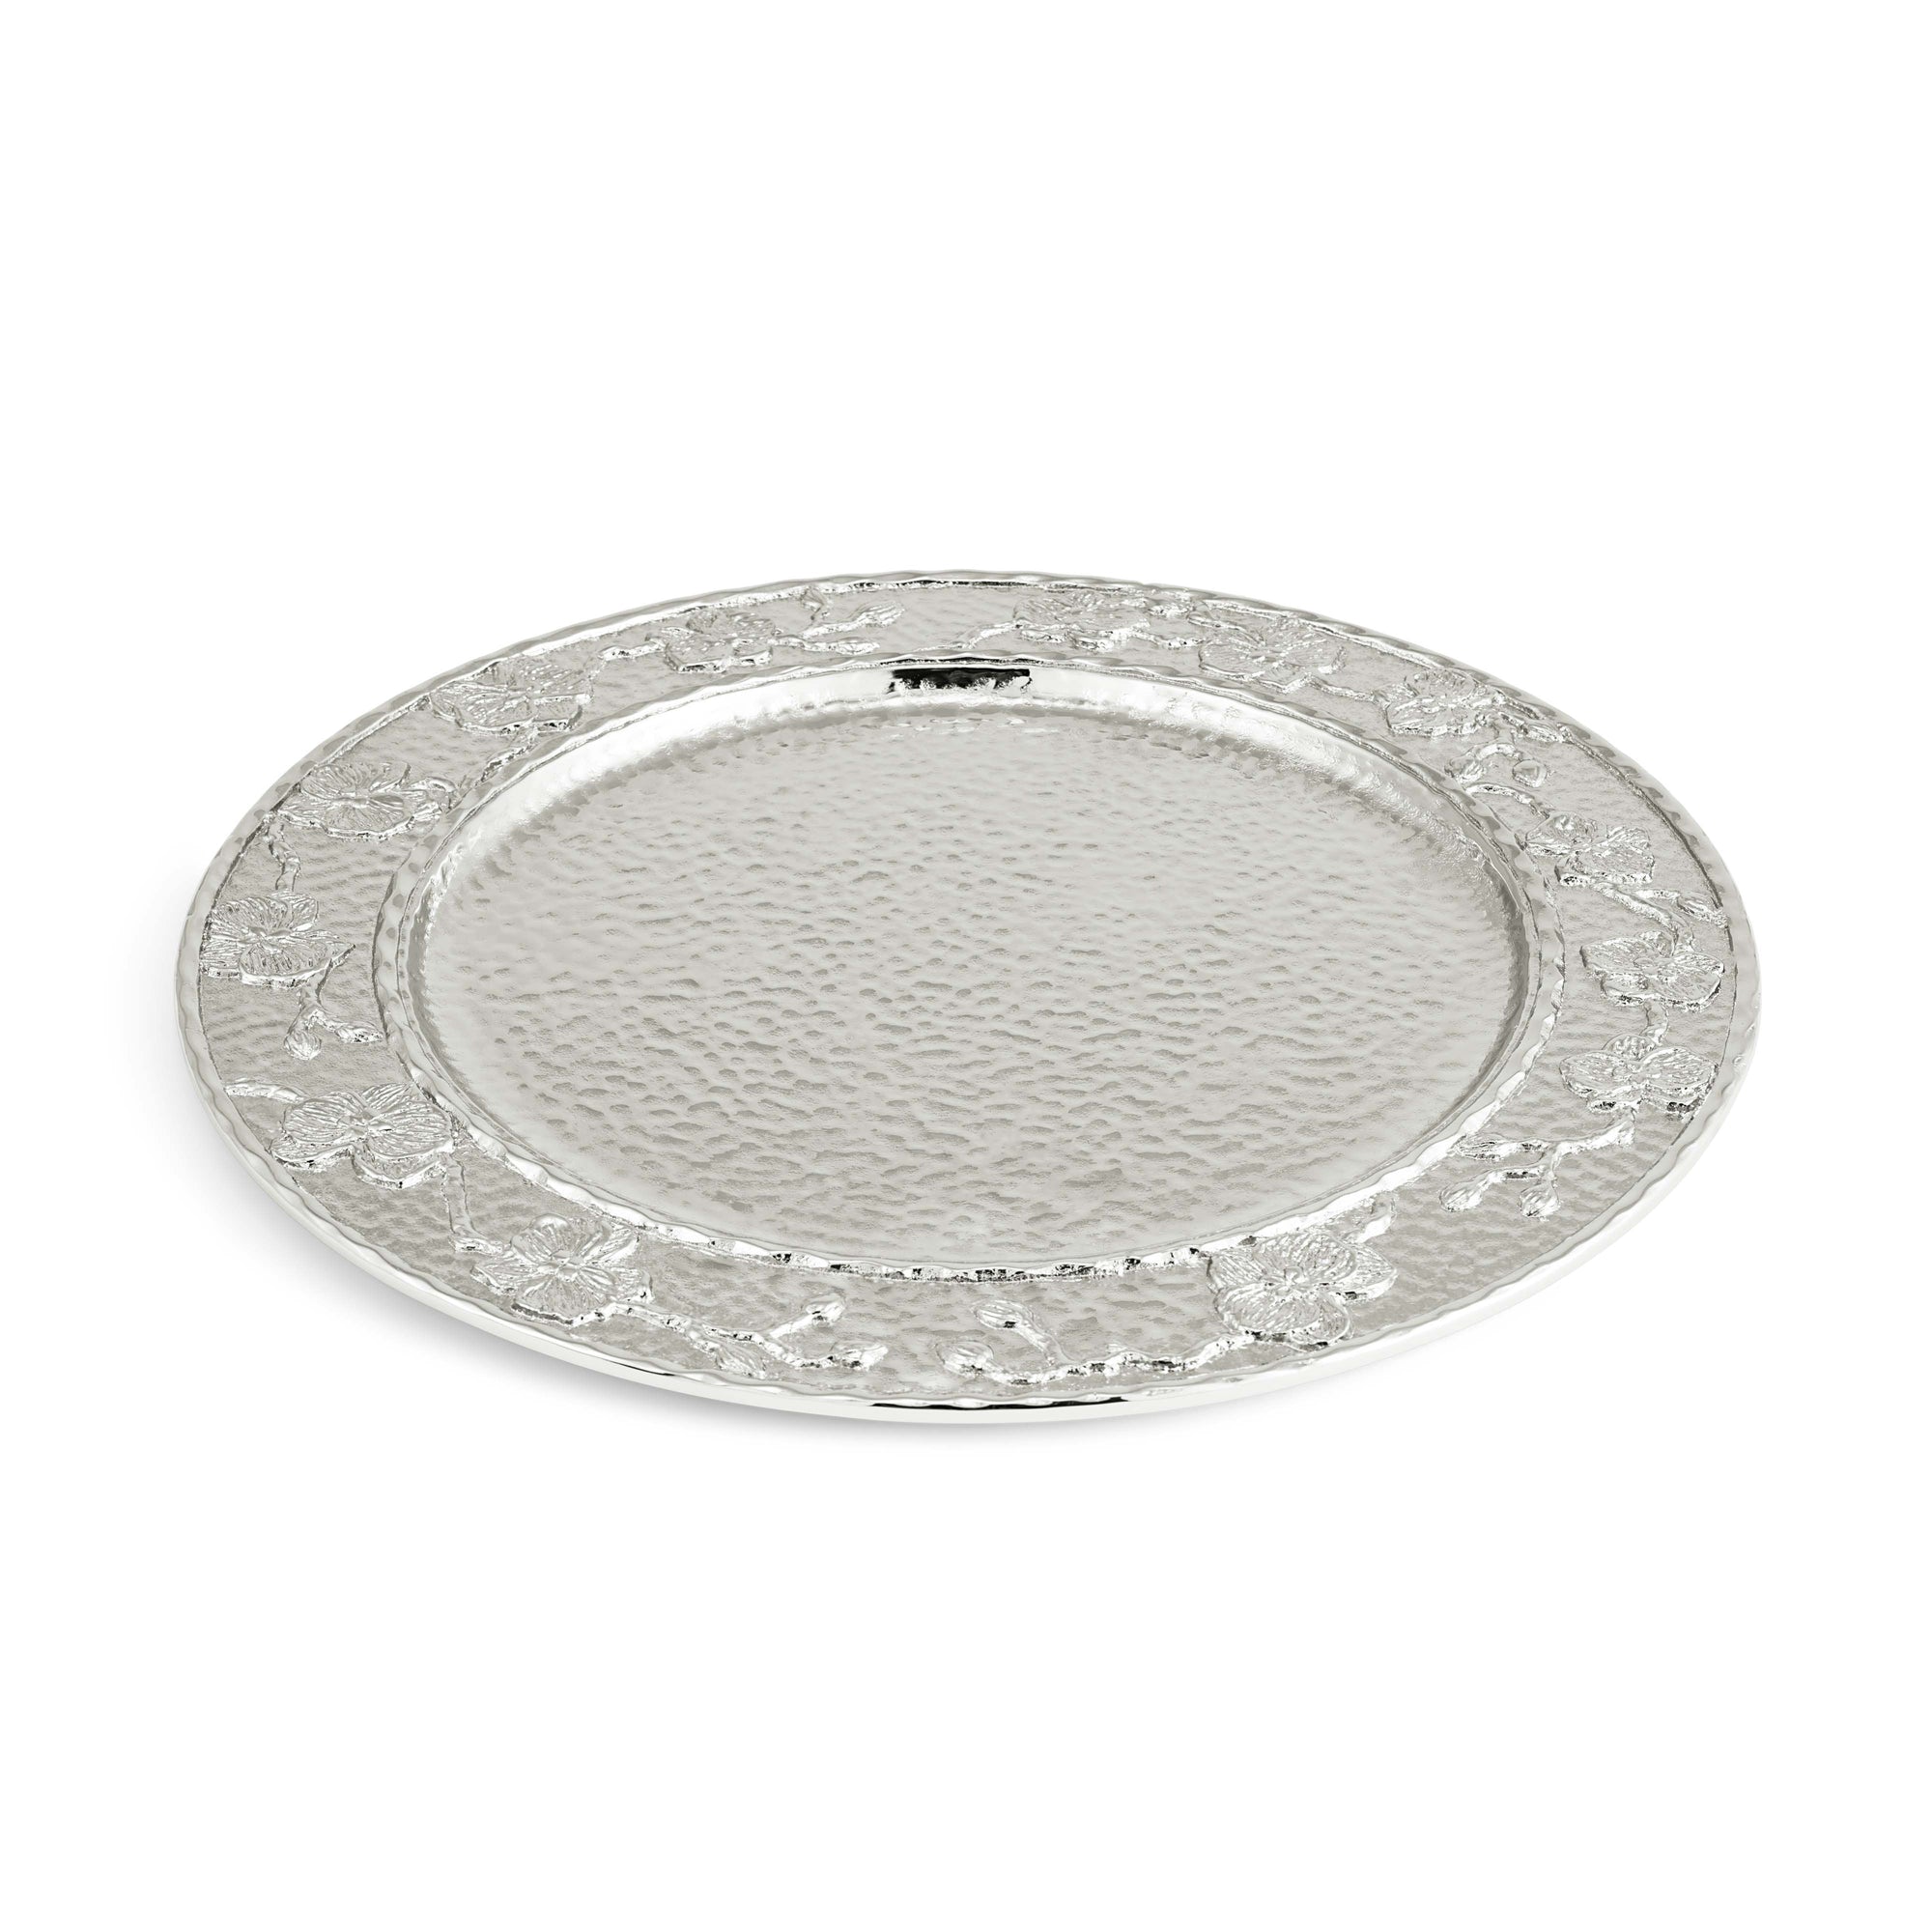 Michael Aram White Orchid Charger Plate